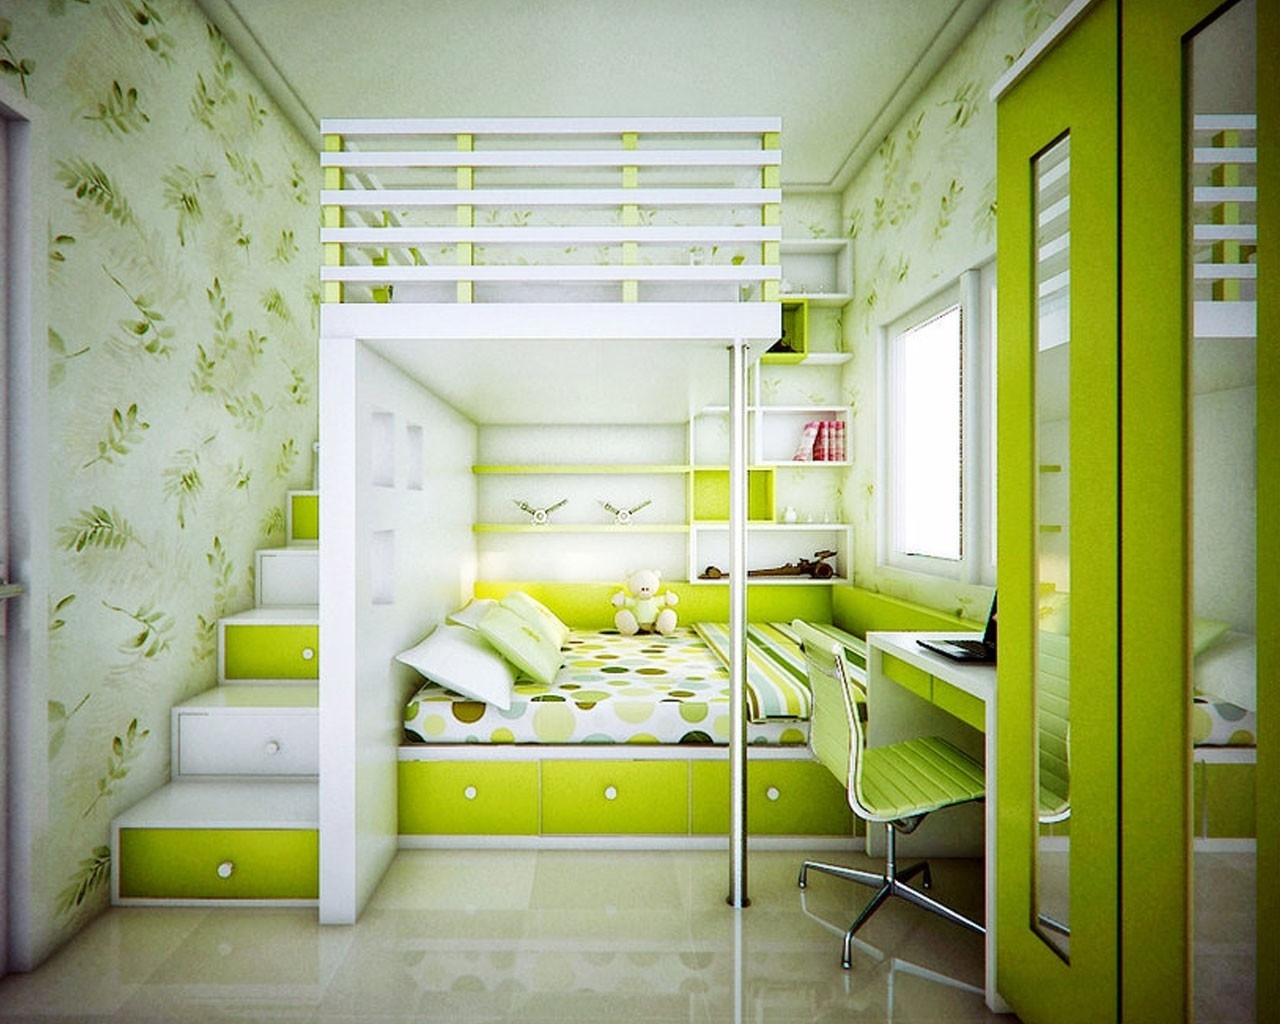 bedroom and children's room in one room ideas photo